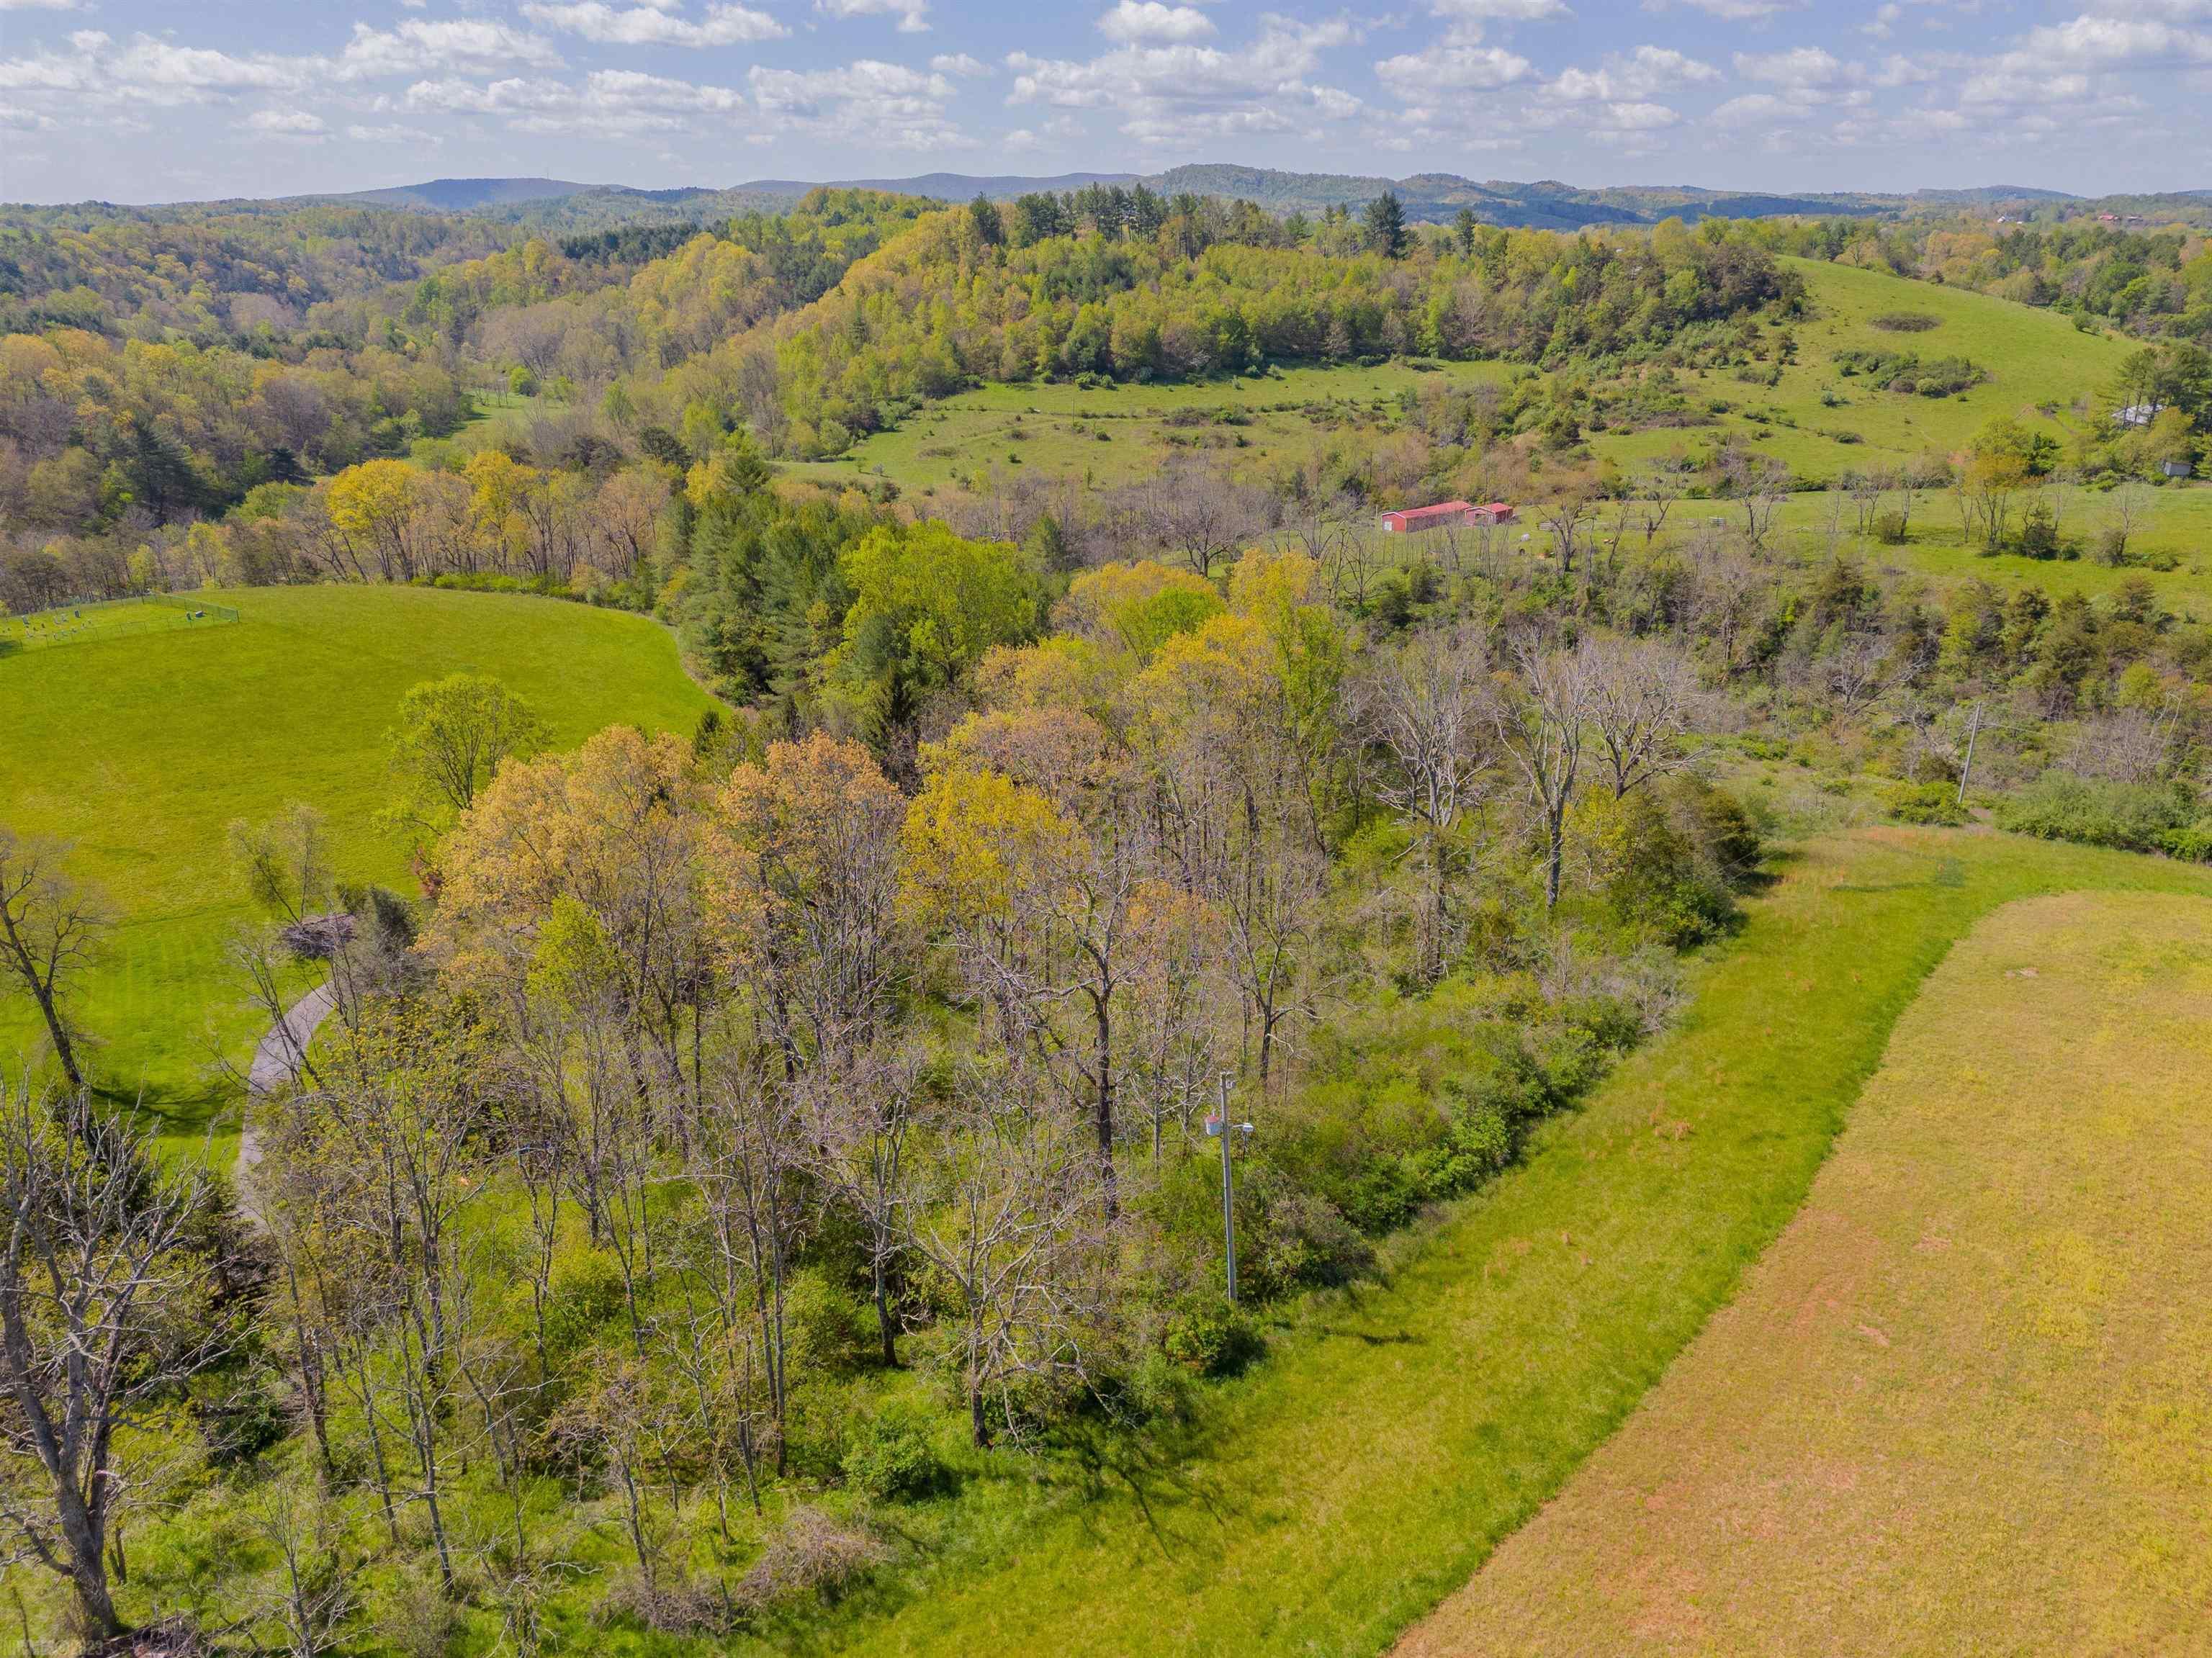 Awesome Opportunity to build your dream home on over 2 acres located in Auburn School district property features gorgeous mountain views, utility hookup and located off state maintained road, don't miss this opportunity!